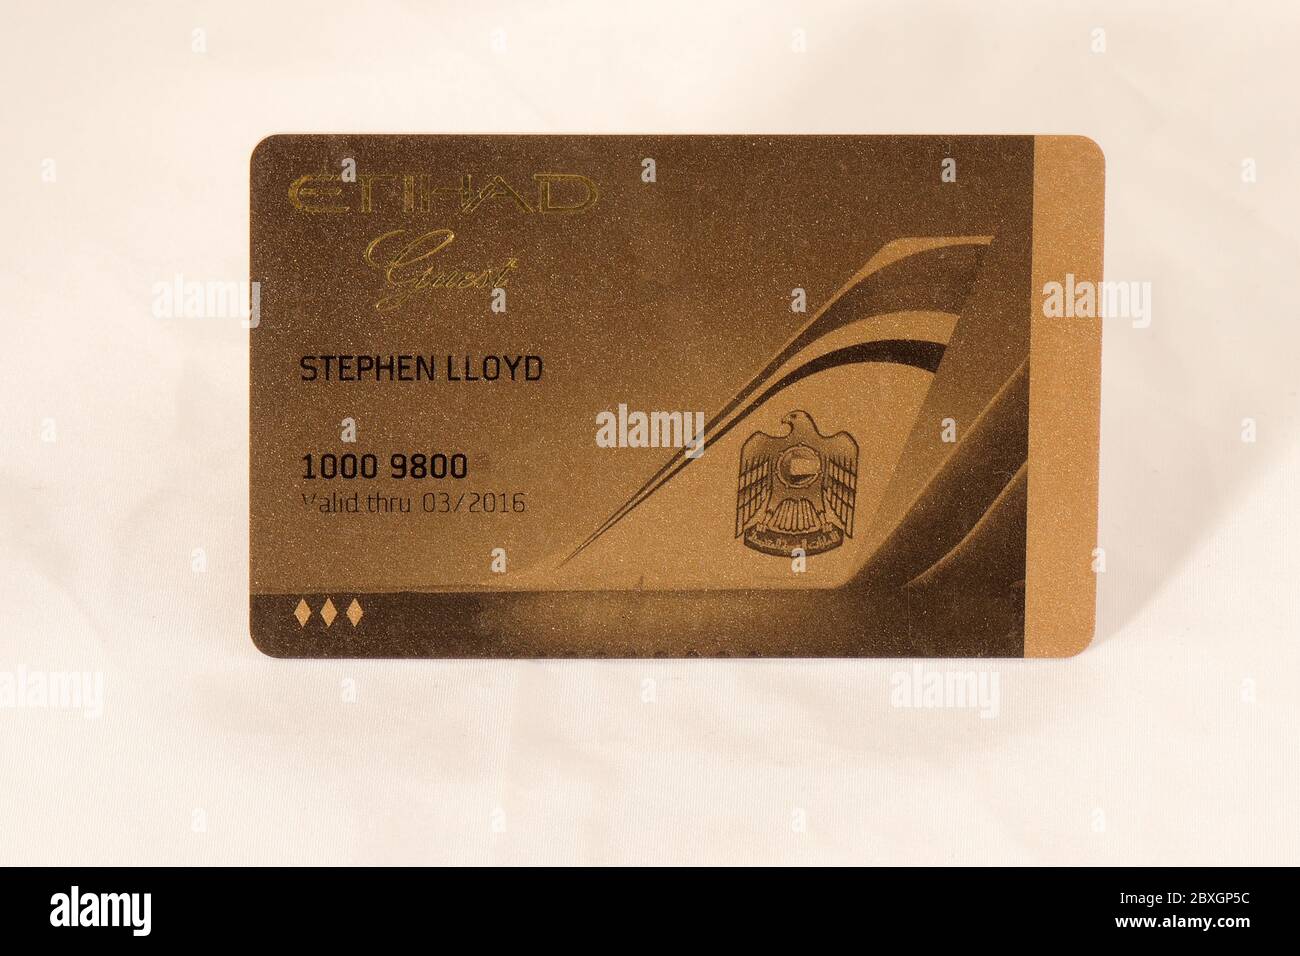 Top level gold frequent flyer card with Etihad airline Stock Photo